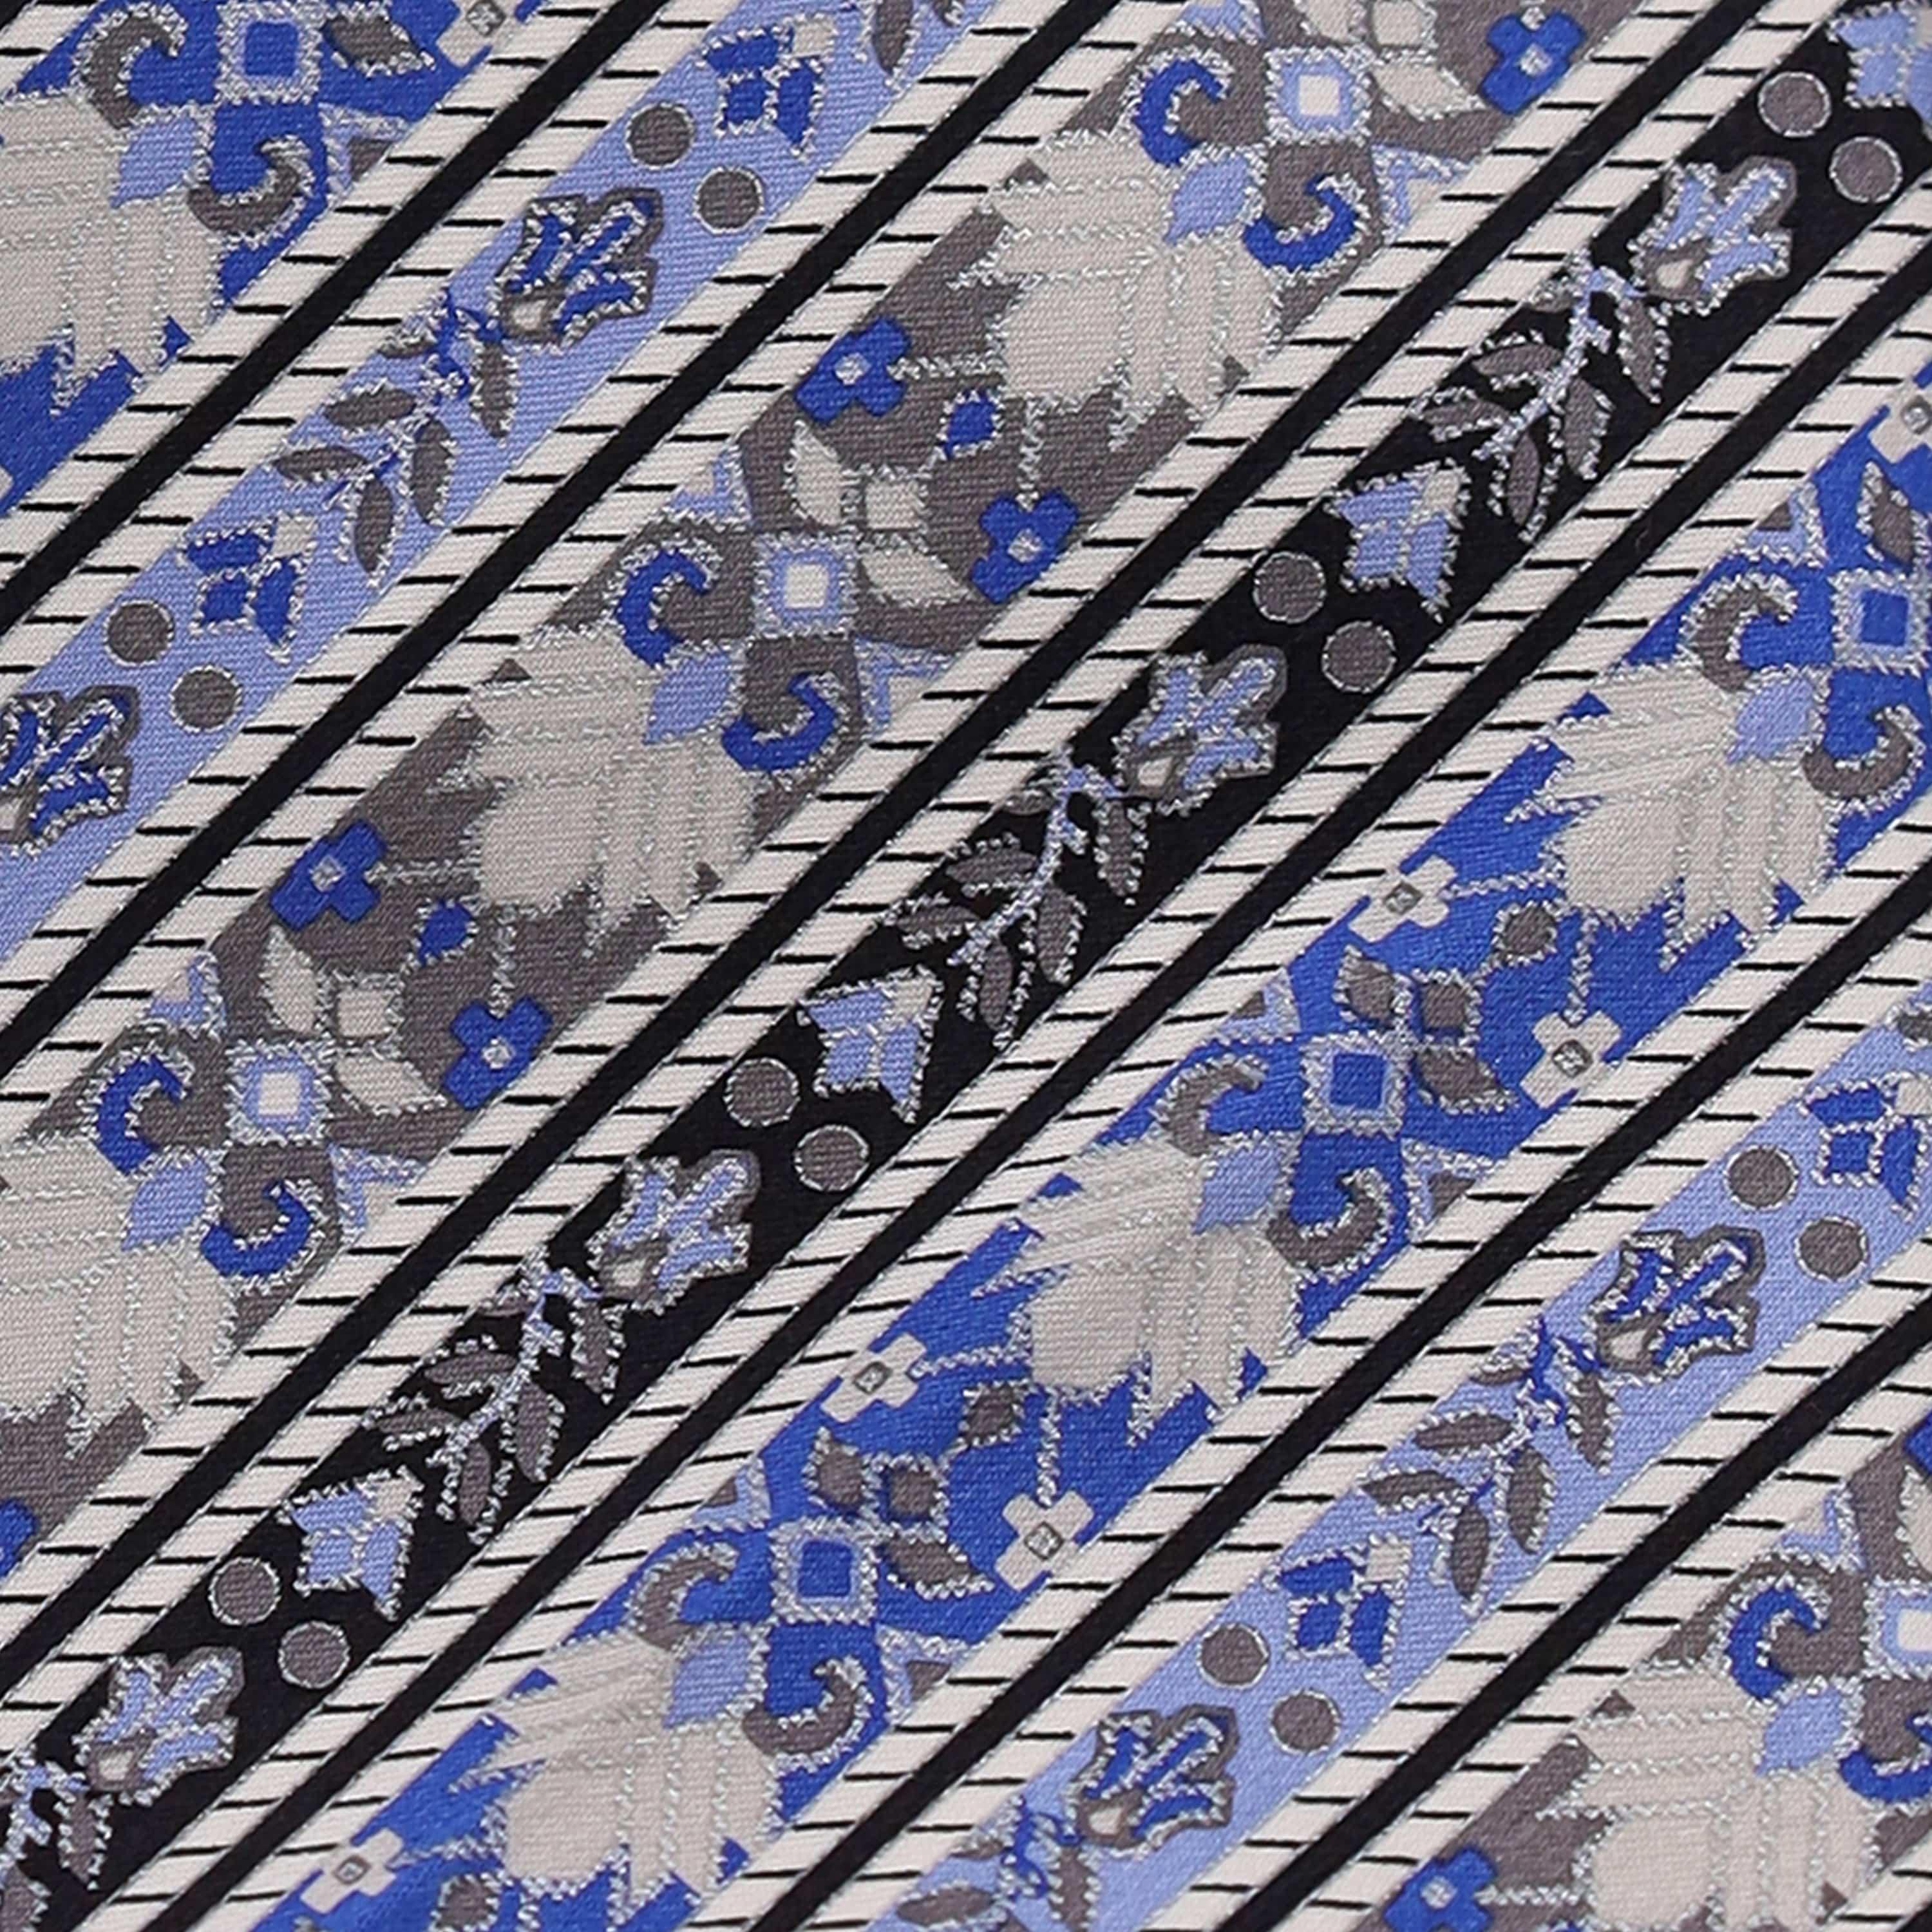 SKY BLUE SILVER AND BLACK STRIPE SILK TIE - Just White Shirts